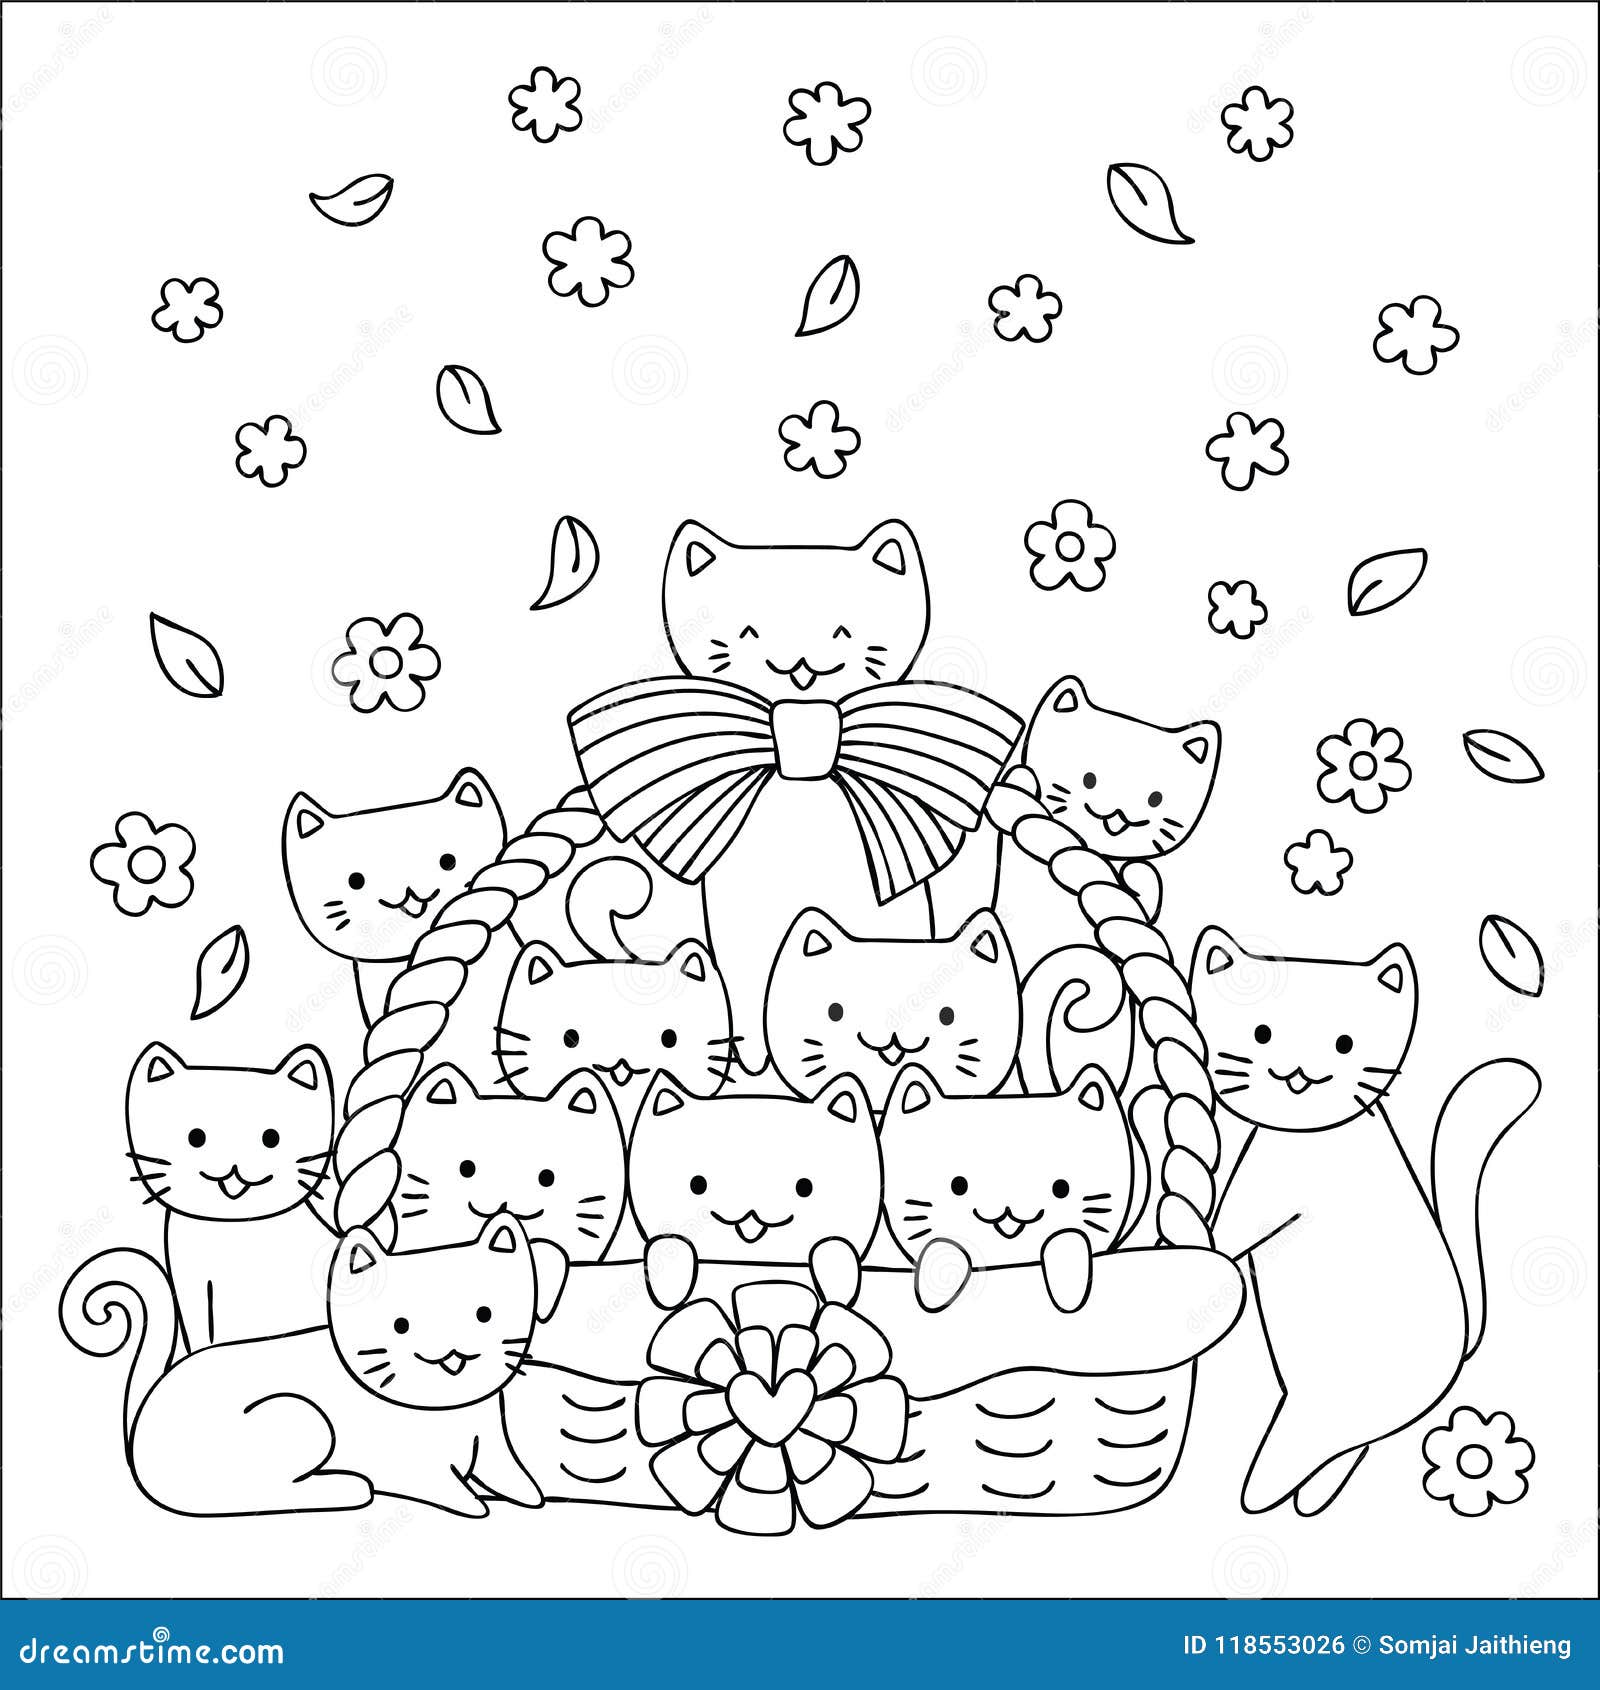 Coloring Pages Cute Kittens - 20 Kitten Coloring Pages : Color these